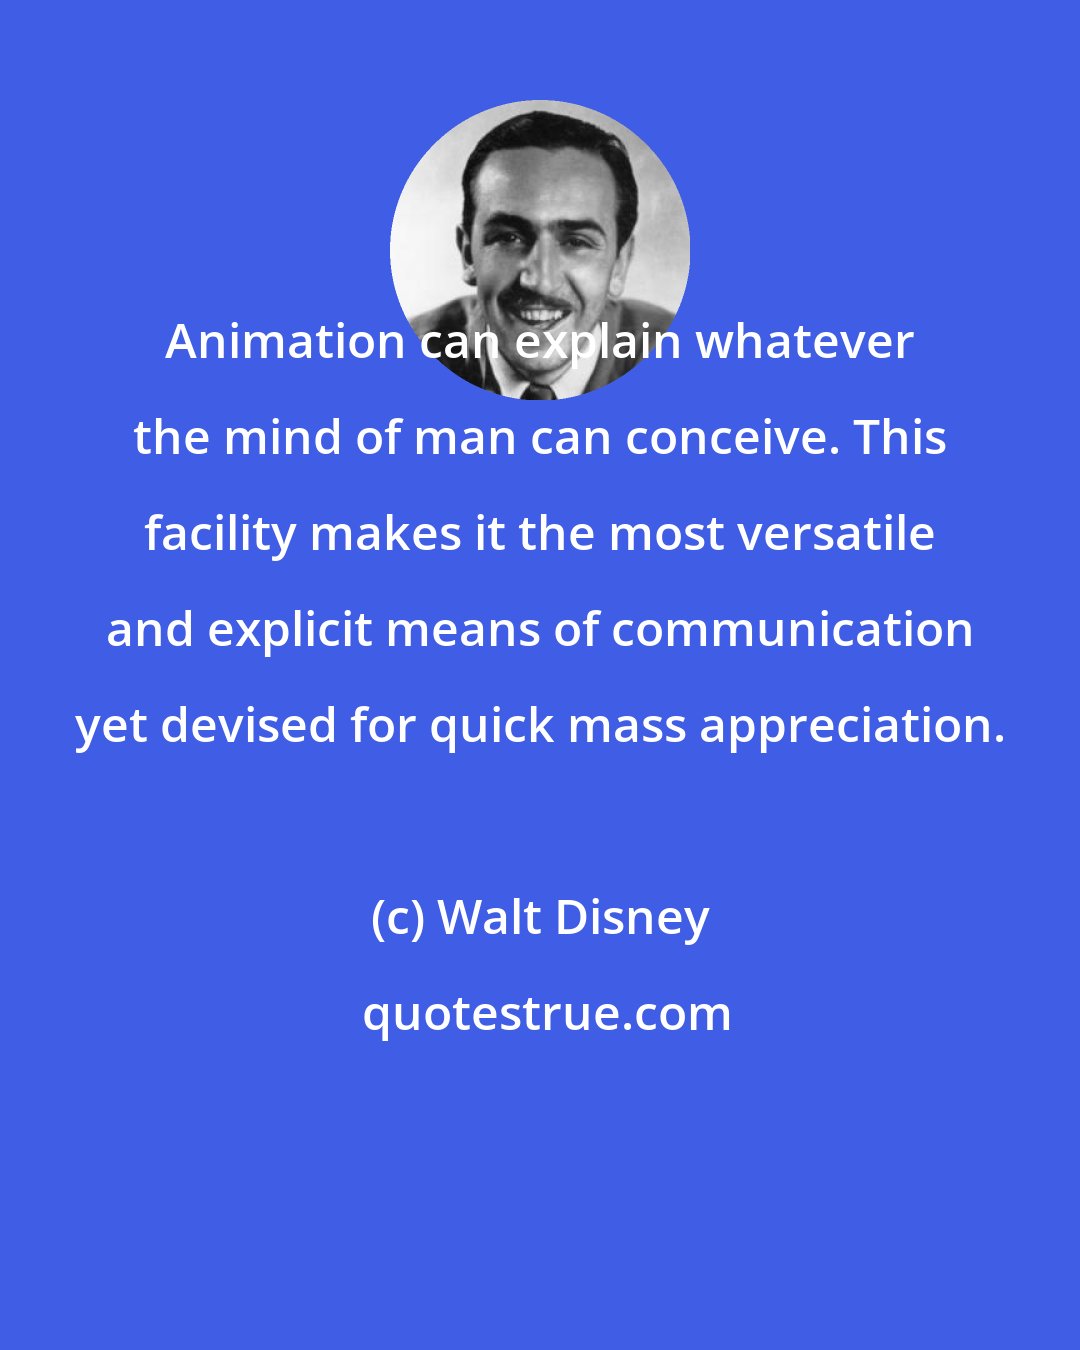 Walt Disney: Animation can explain whatever the mind of man can conceive. This facility makes it the most versatile and explicit means of communication yet devised for quick mass appreciation.